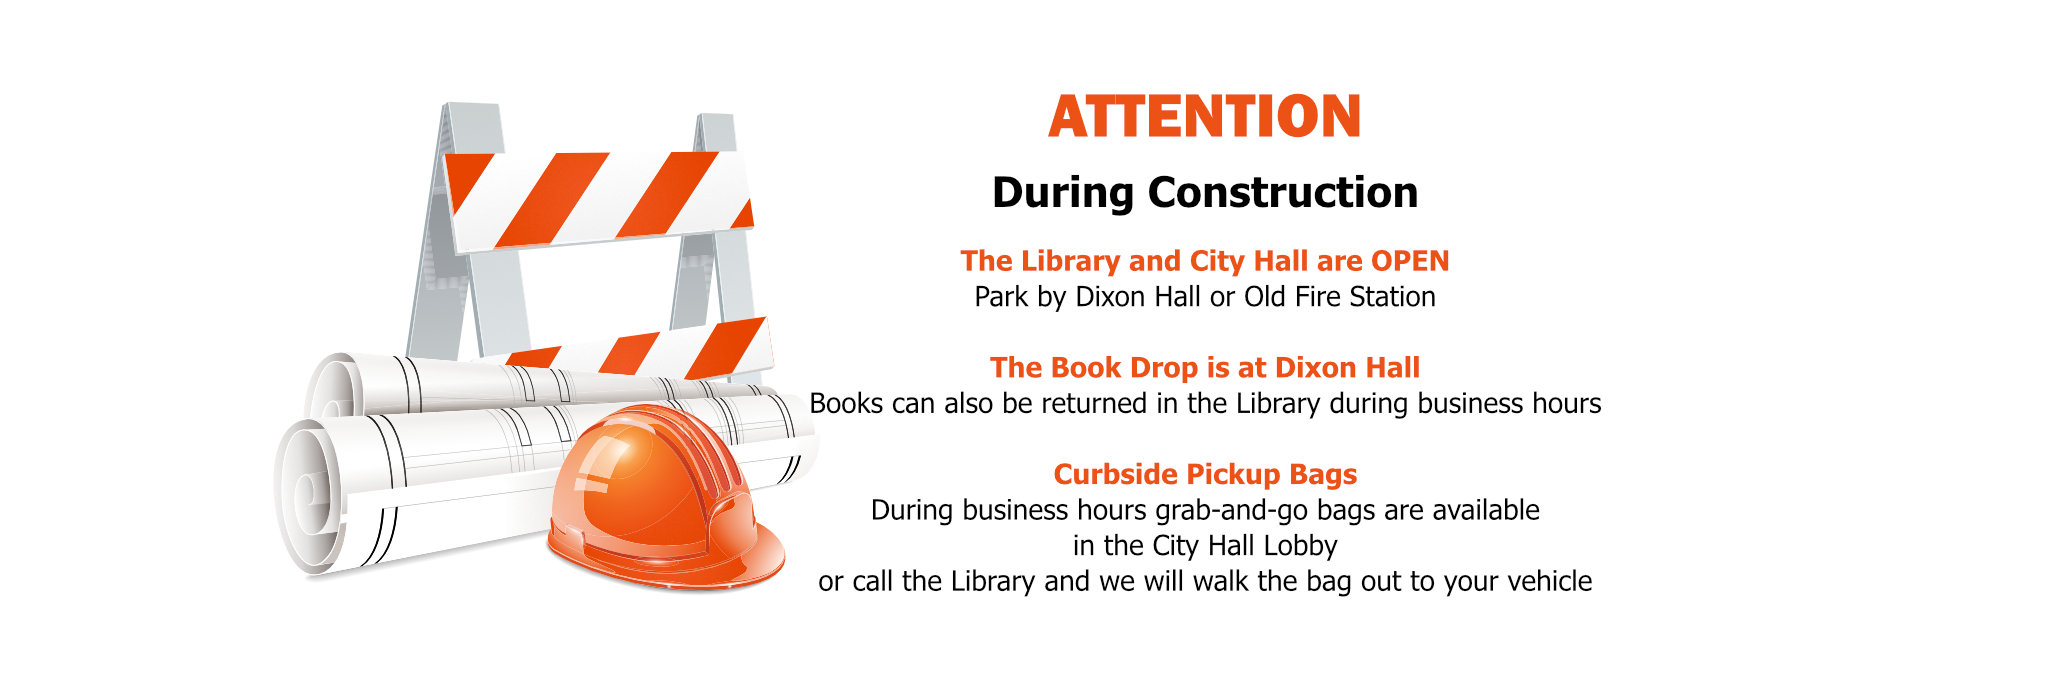 Library Construction Parking and bookdrop information